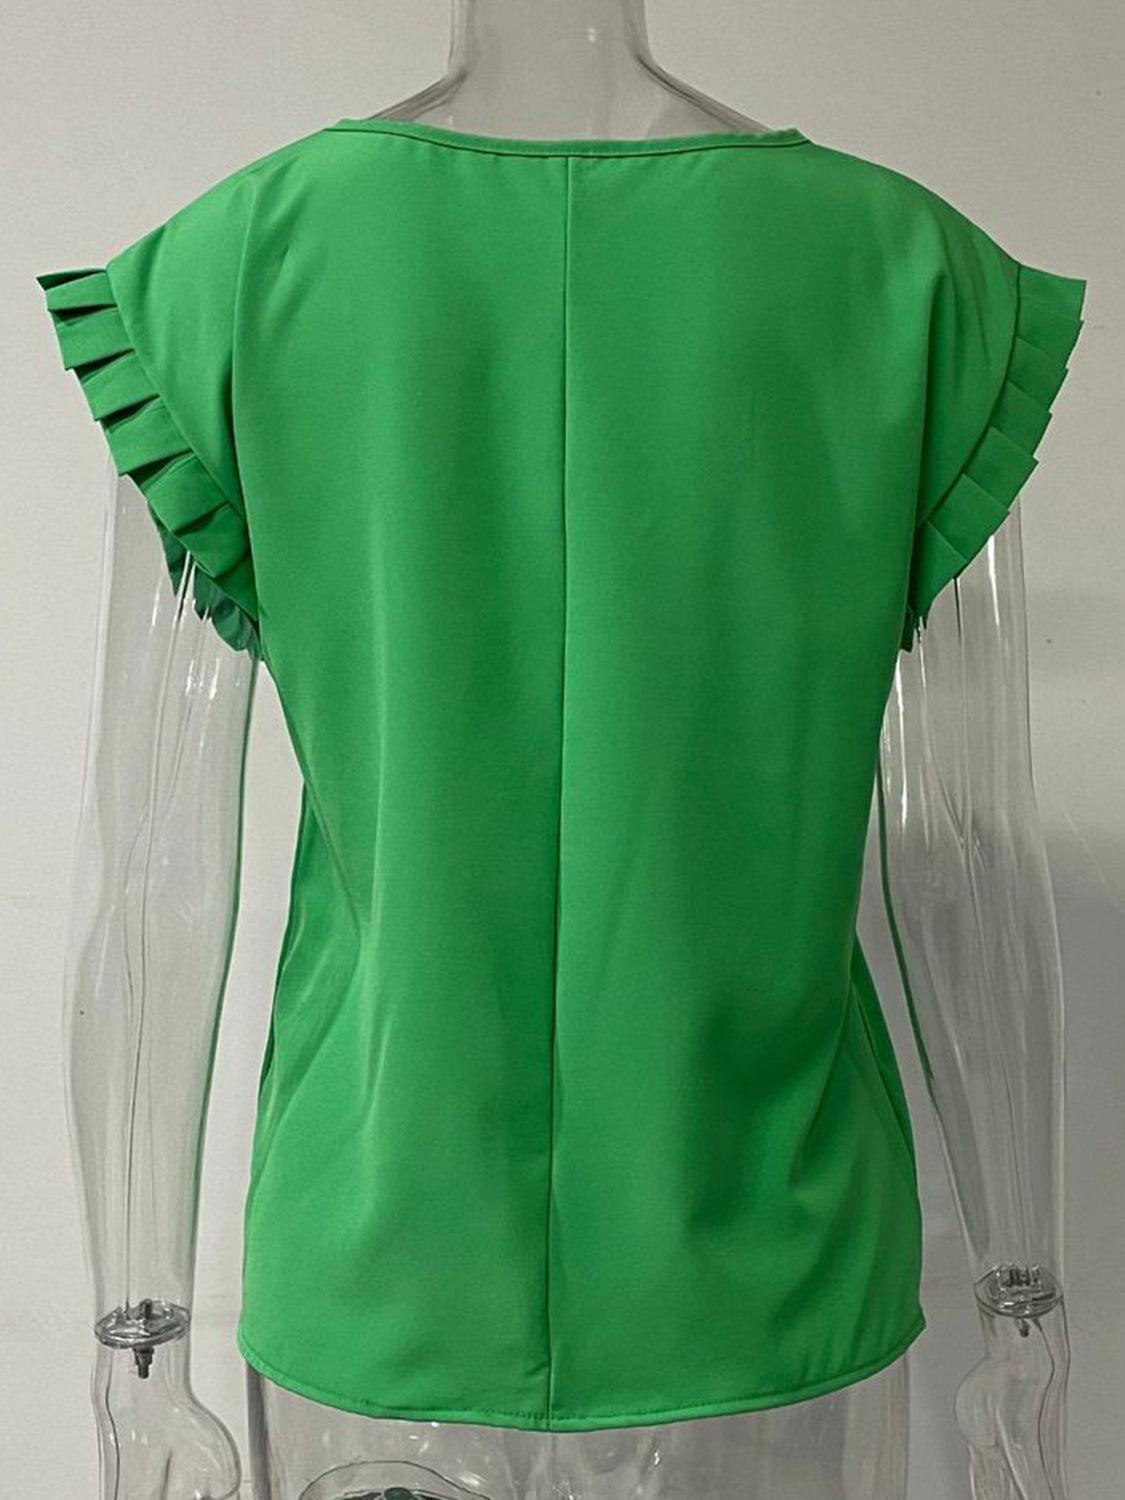 a mannequin wearing a green top with ruffles